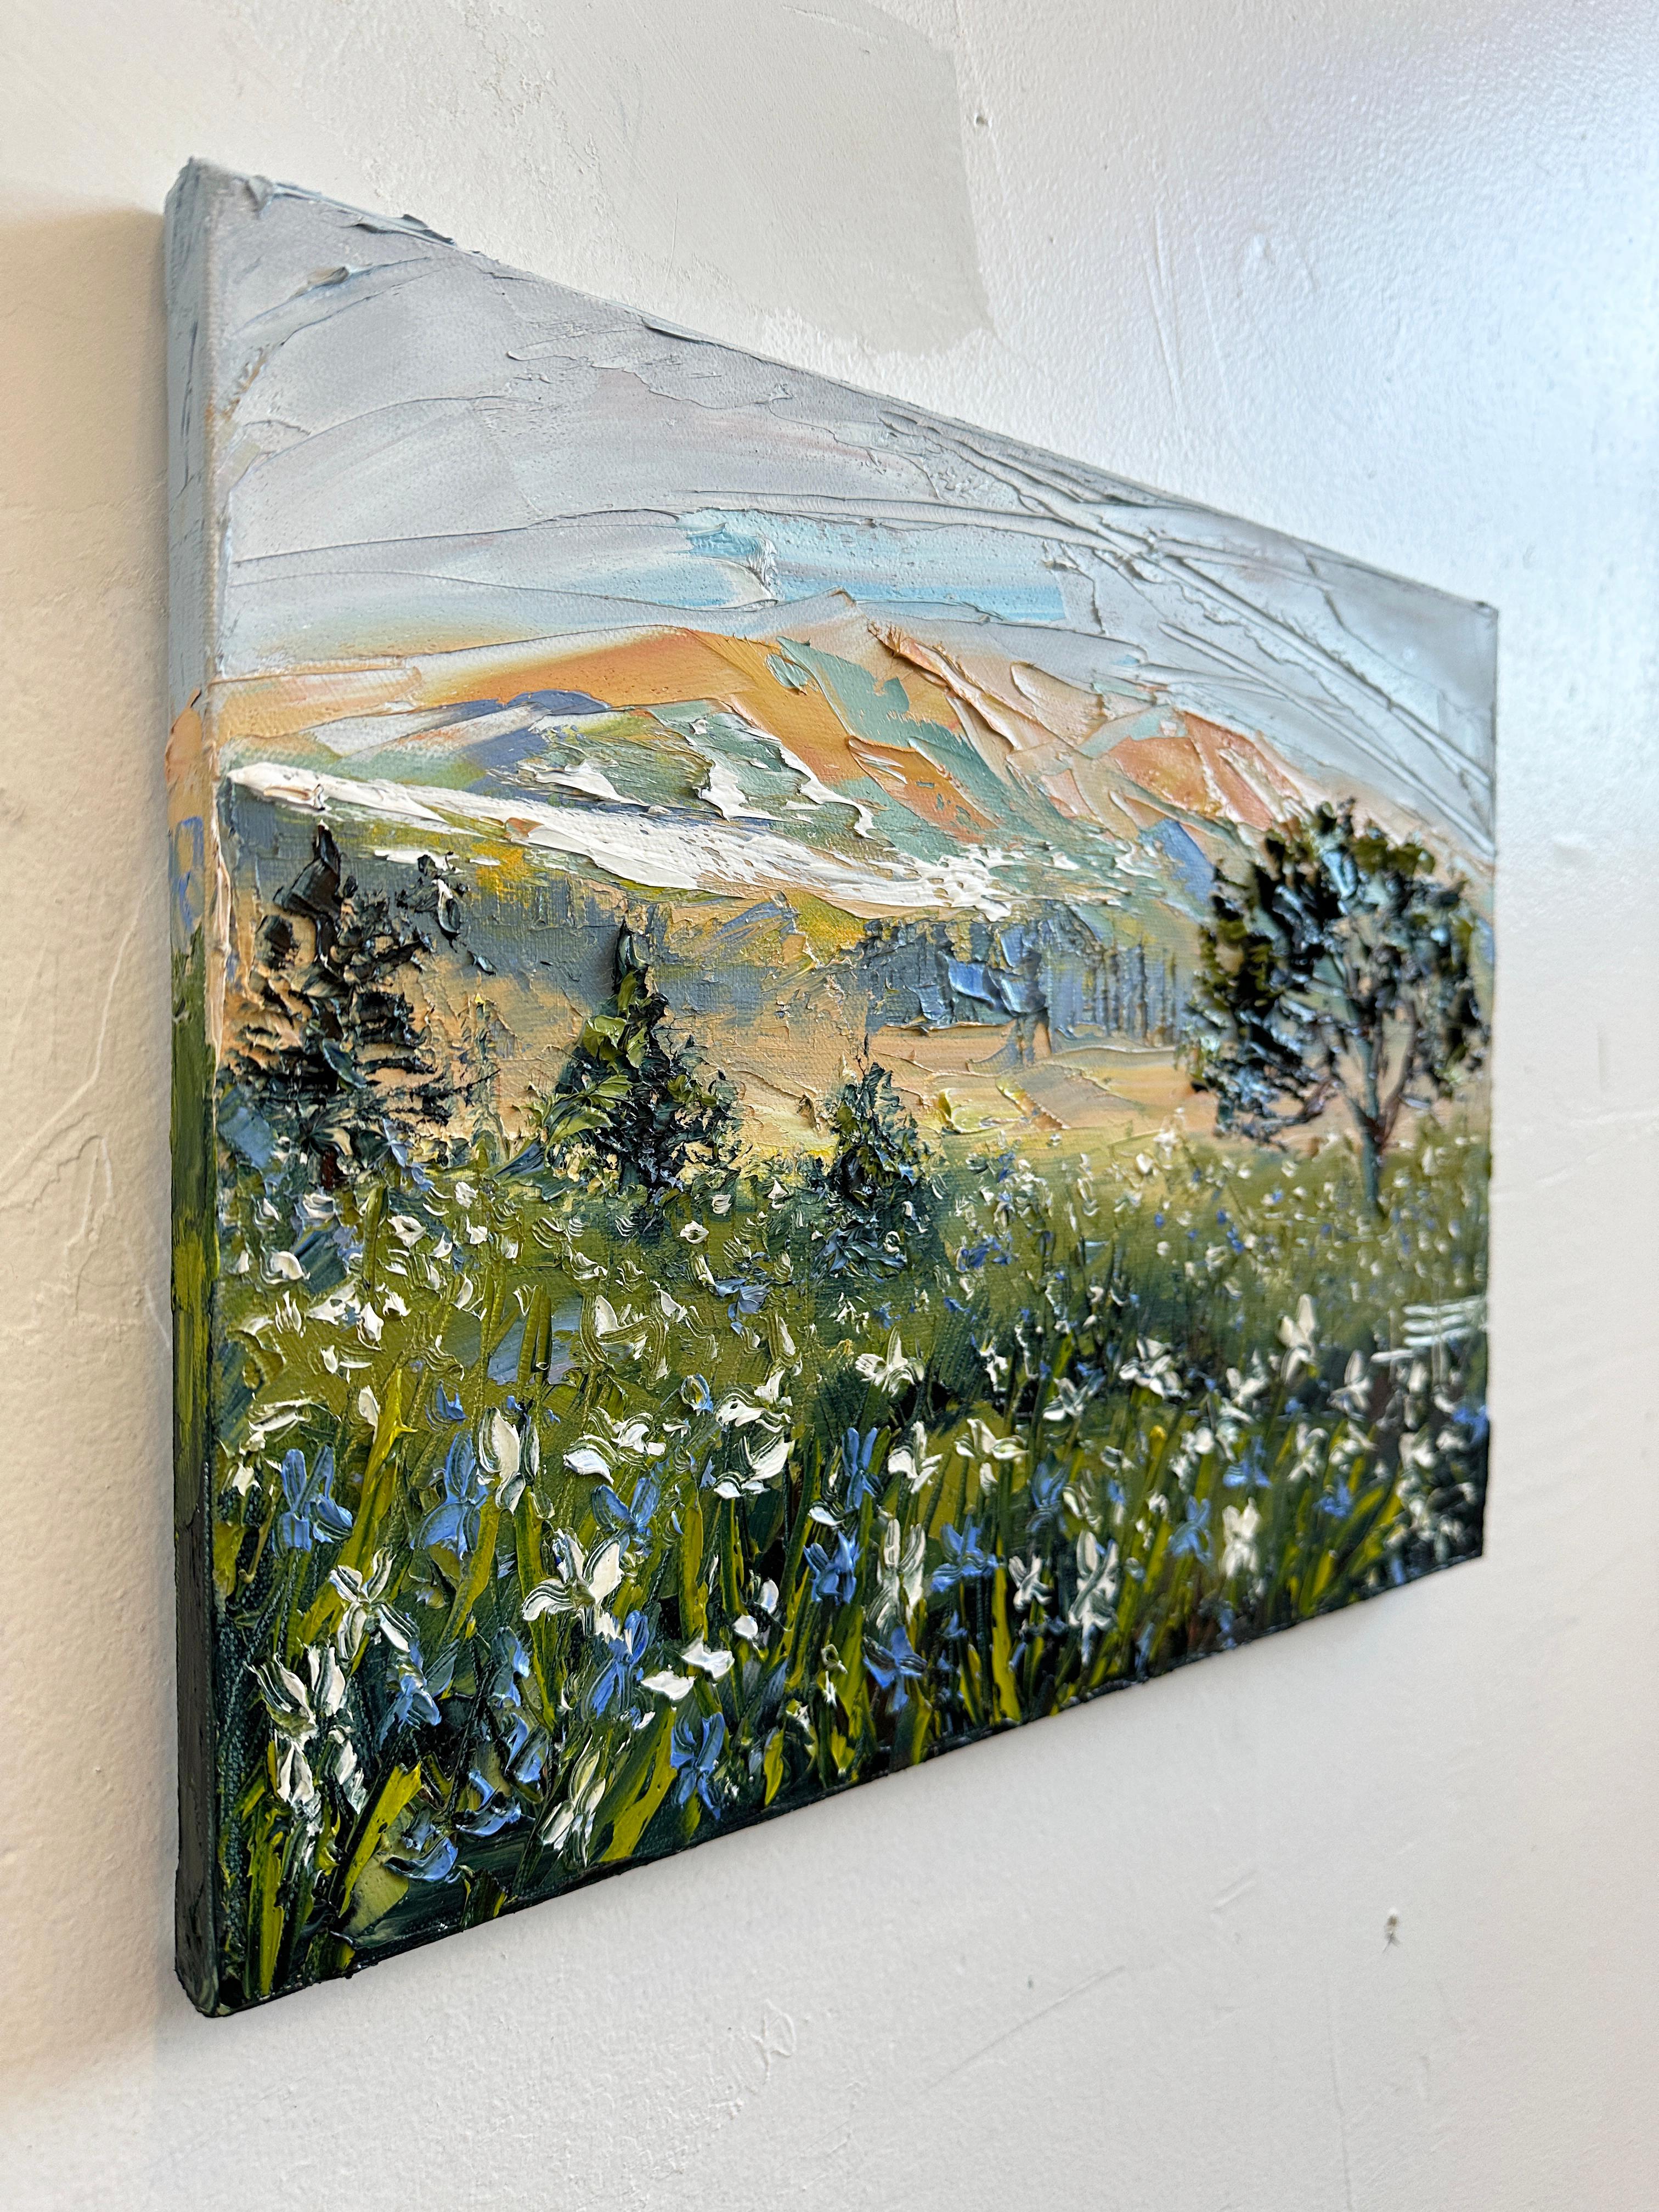 <p>Artist Comments<br>Nestled in Coastal Big Sur, California, the jagged cliffs meet the soothing azure waves, creating a picturesque scenery. Enhanced by the vibrant hues of the wildflowers and irises, the mountainous terrain is accentuated with